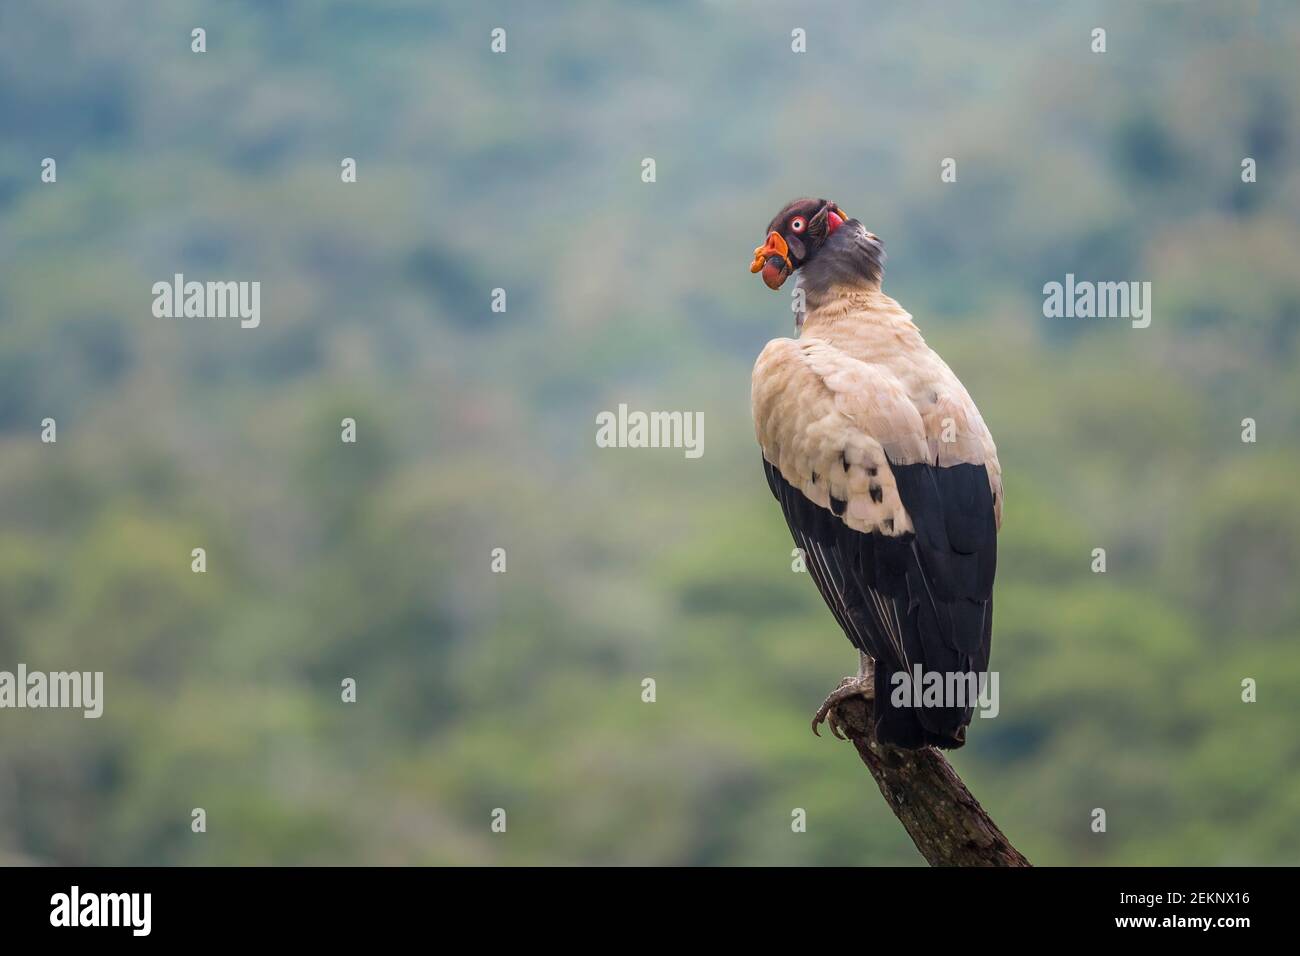 Strange adult King Vulture bird (Sarcoramphus papa), perched at a high point surrounded by mountains, black and white plumage, pale iris and red eye Stock Photo